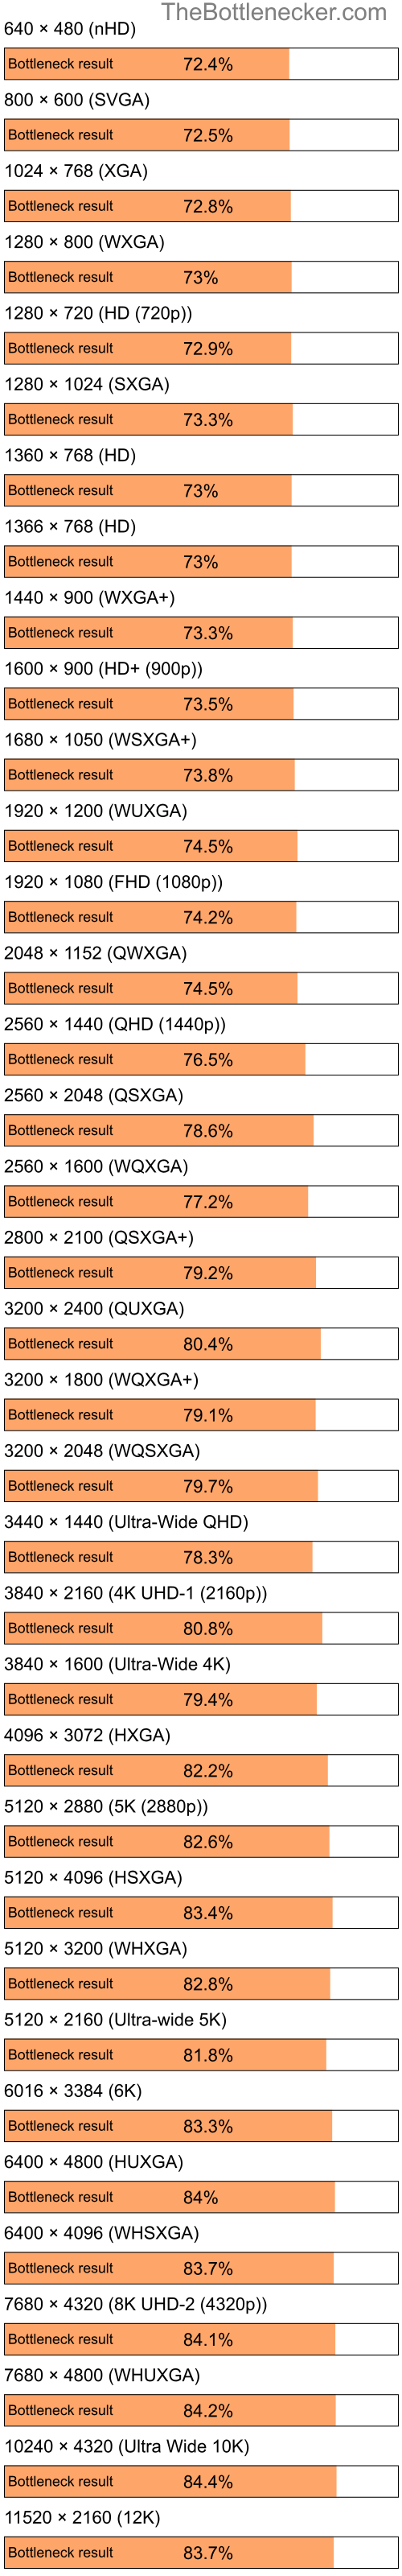 Bottleneck results by resolution for Intel Celeron M 420 and NVIDIA GeForce 6600 in Graphic Card Intense Tasks